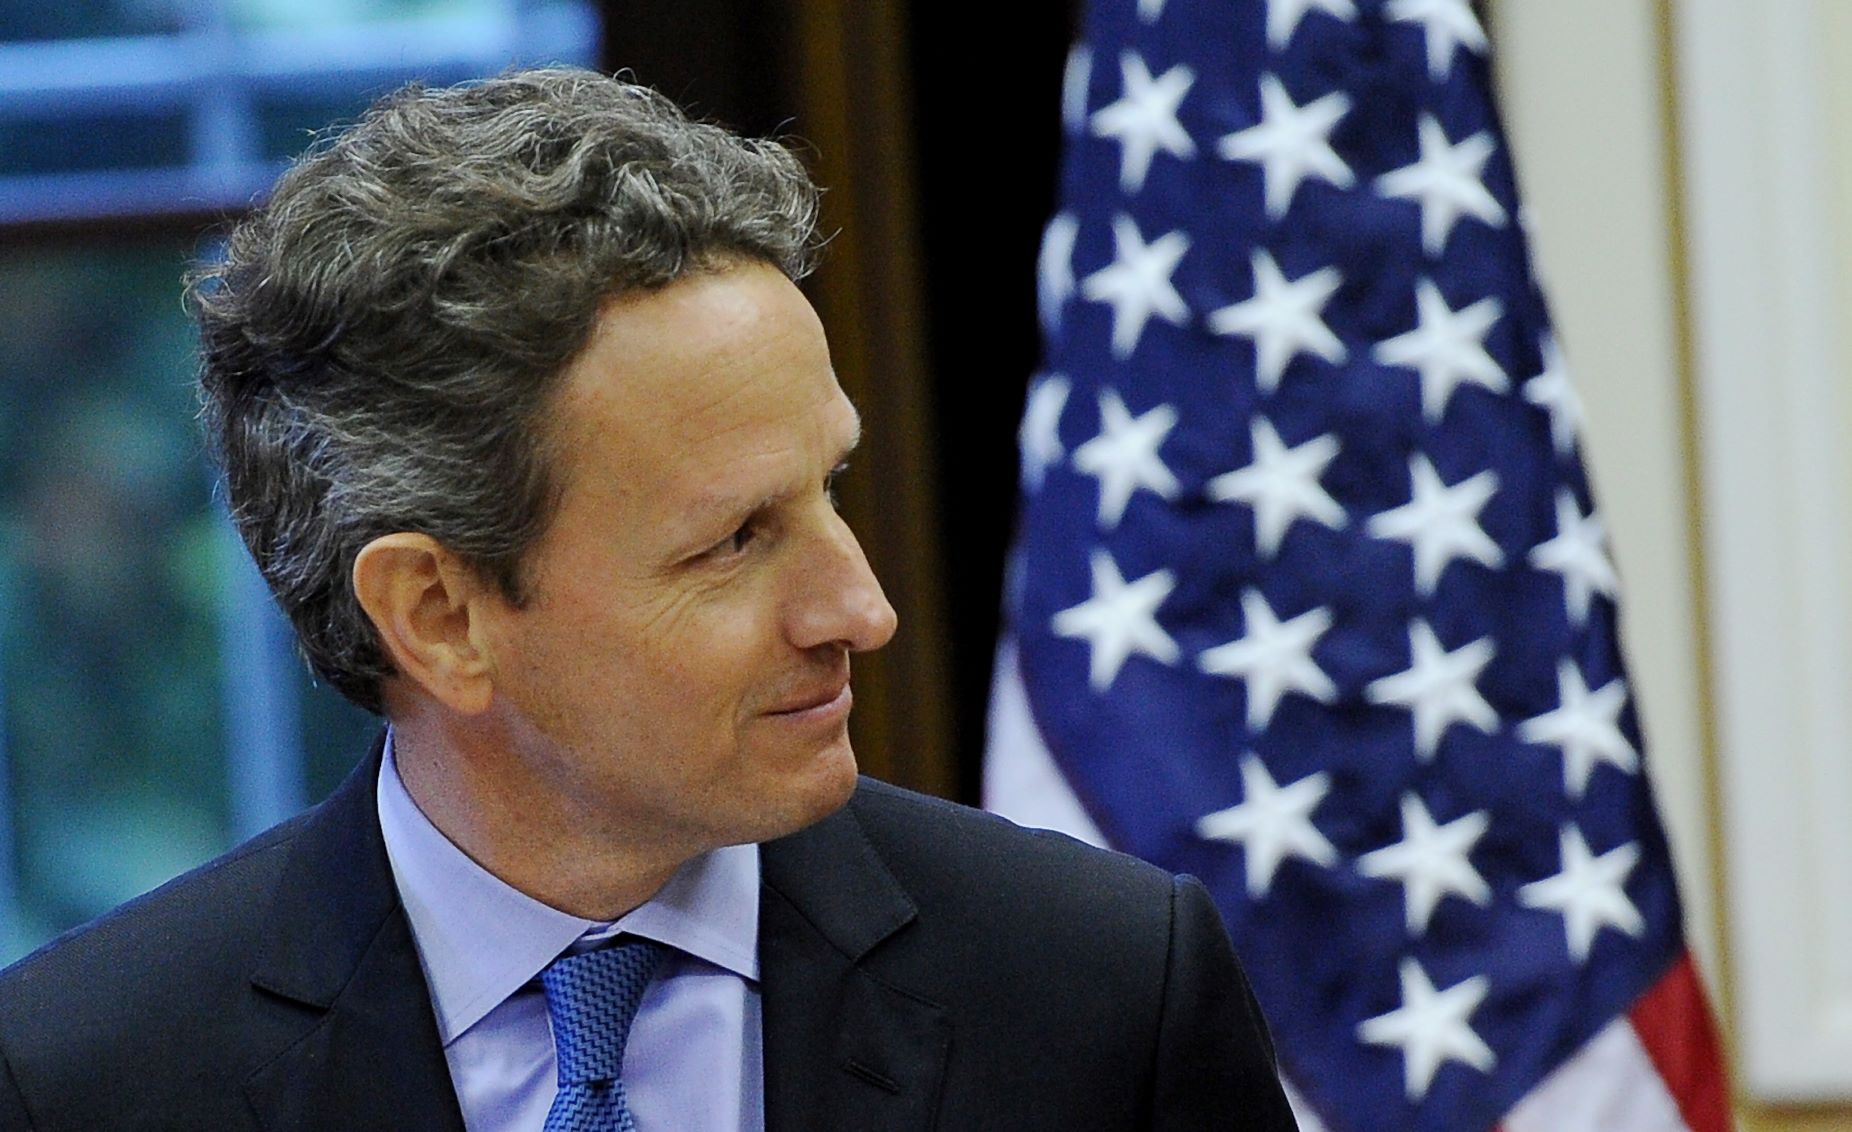 20211006-image-mb-dpa-Timothy Geithner